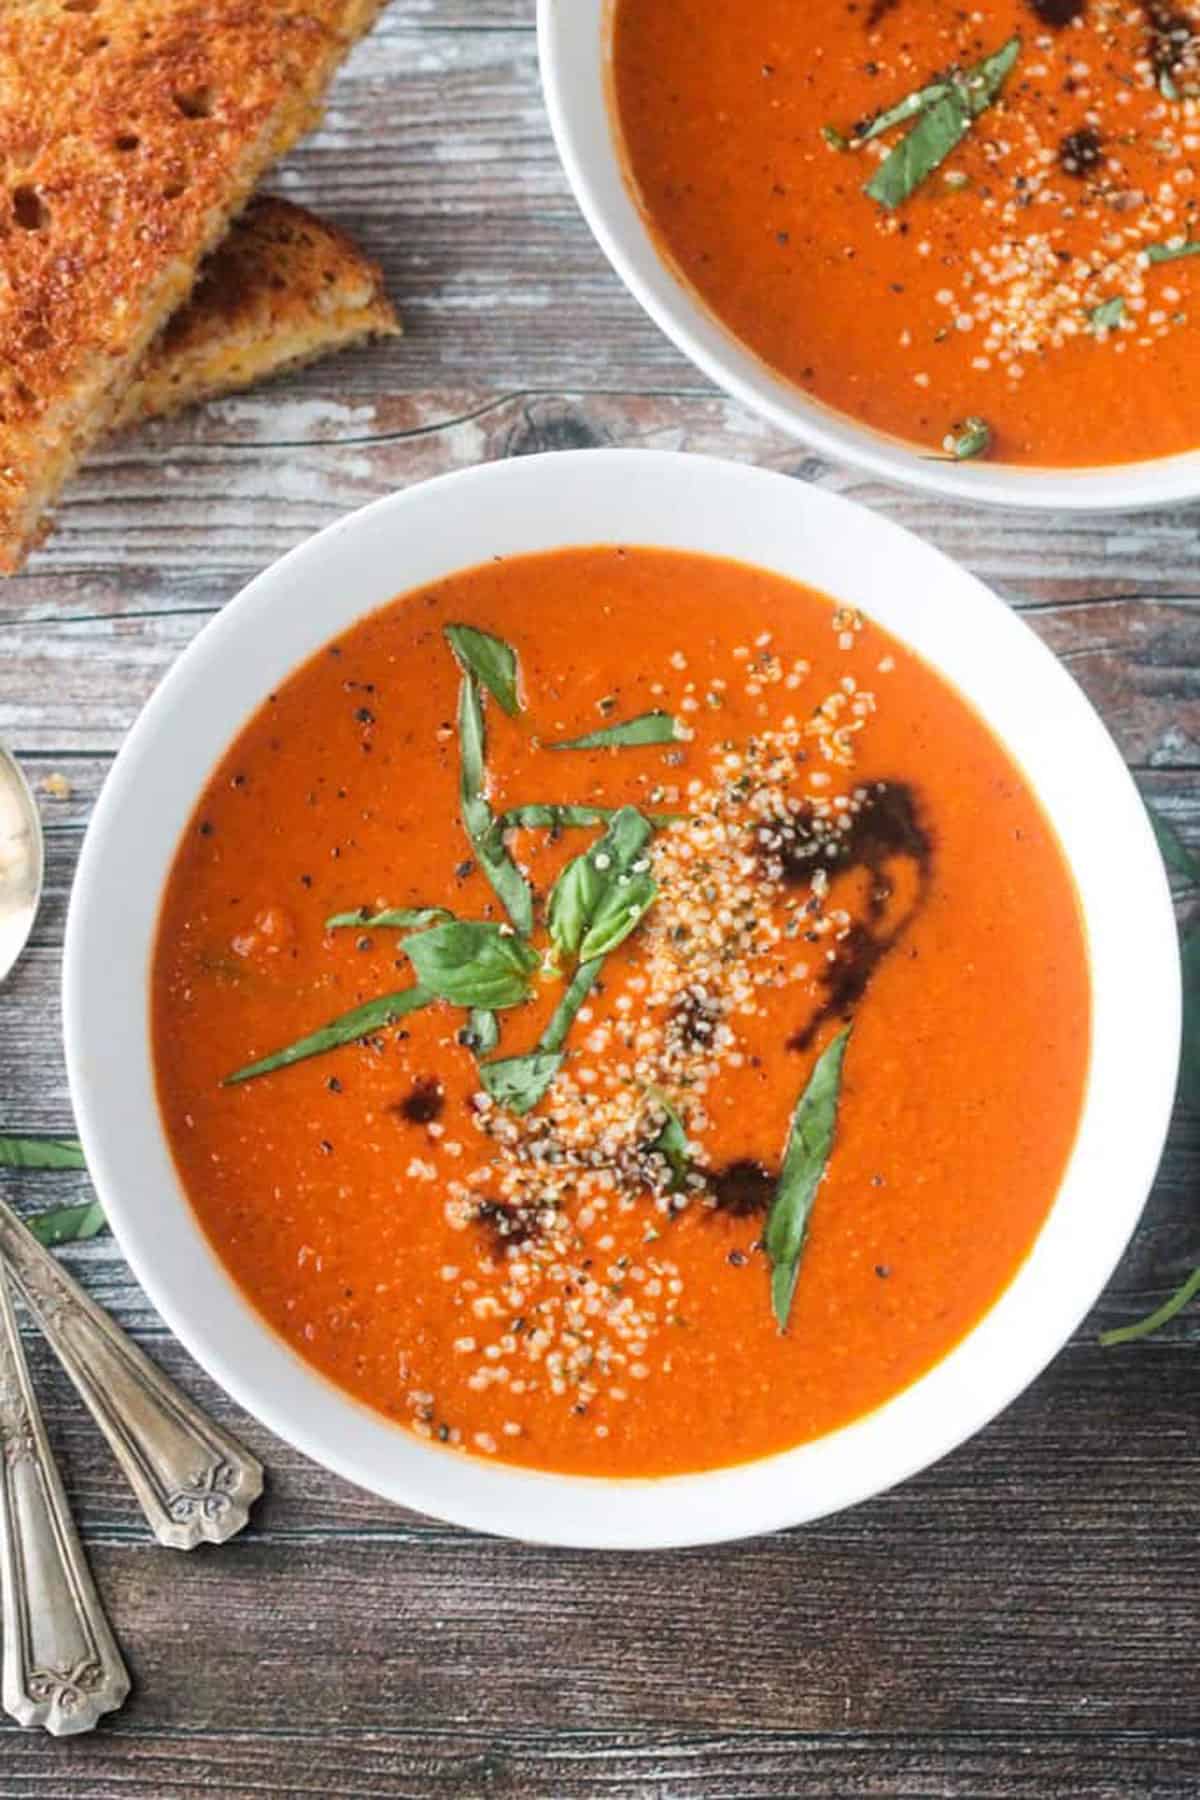 Bowl of tomato soup garnished with fresh basil, hemp seeds, and drizzle of balsamic vinegar.